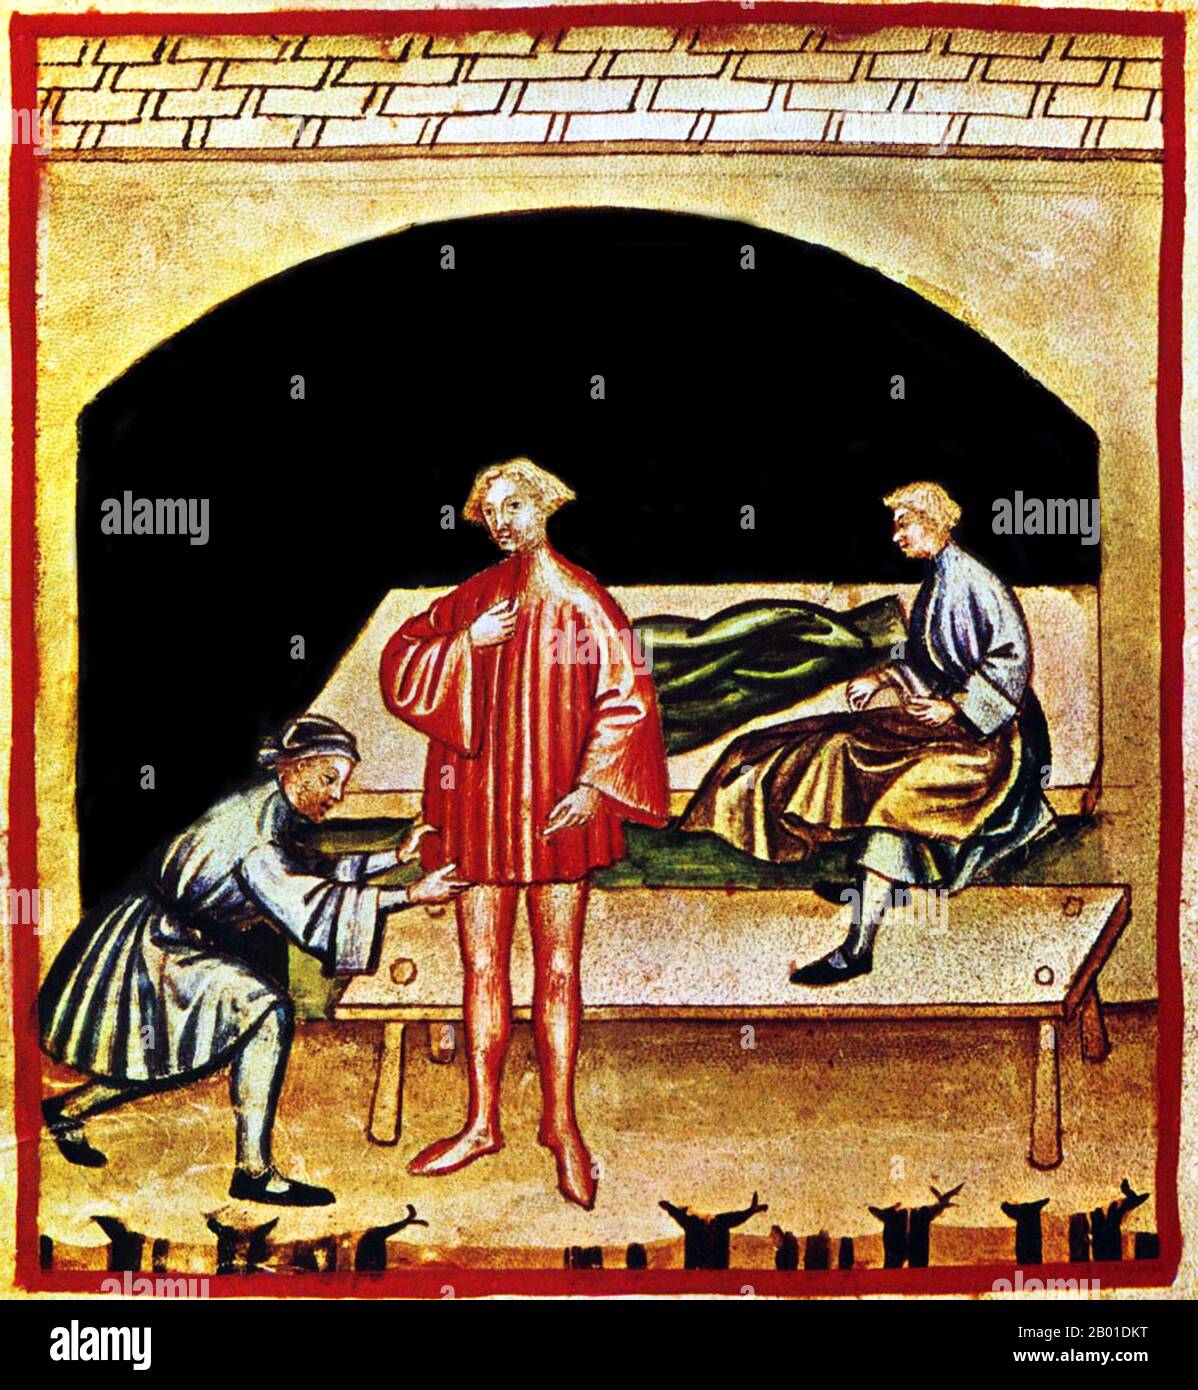 Iraq/Italy: Fitting woolen clothing at a tailor's shop. Illustration from Ibn Butlan's Taqwim al-sihha or 'Maintenance of Health', published in Italy as the Tacuinum Sanitatis, 14th century.  The Tacuinum (sometimes Taccuinum) Sanitatis is a medieval handbook on health and wellbeing, based on the Taqwim al‑sihha, an eleventh-century Arab medical treatise by Ibn Butlan of Baghdad.  Ibn Butlân was a Christian physician born in Baghdad and who died in 1068.  He set forth six elements necessary to maintain daily health. Stock Photo